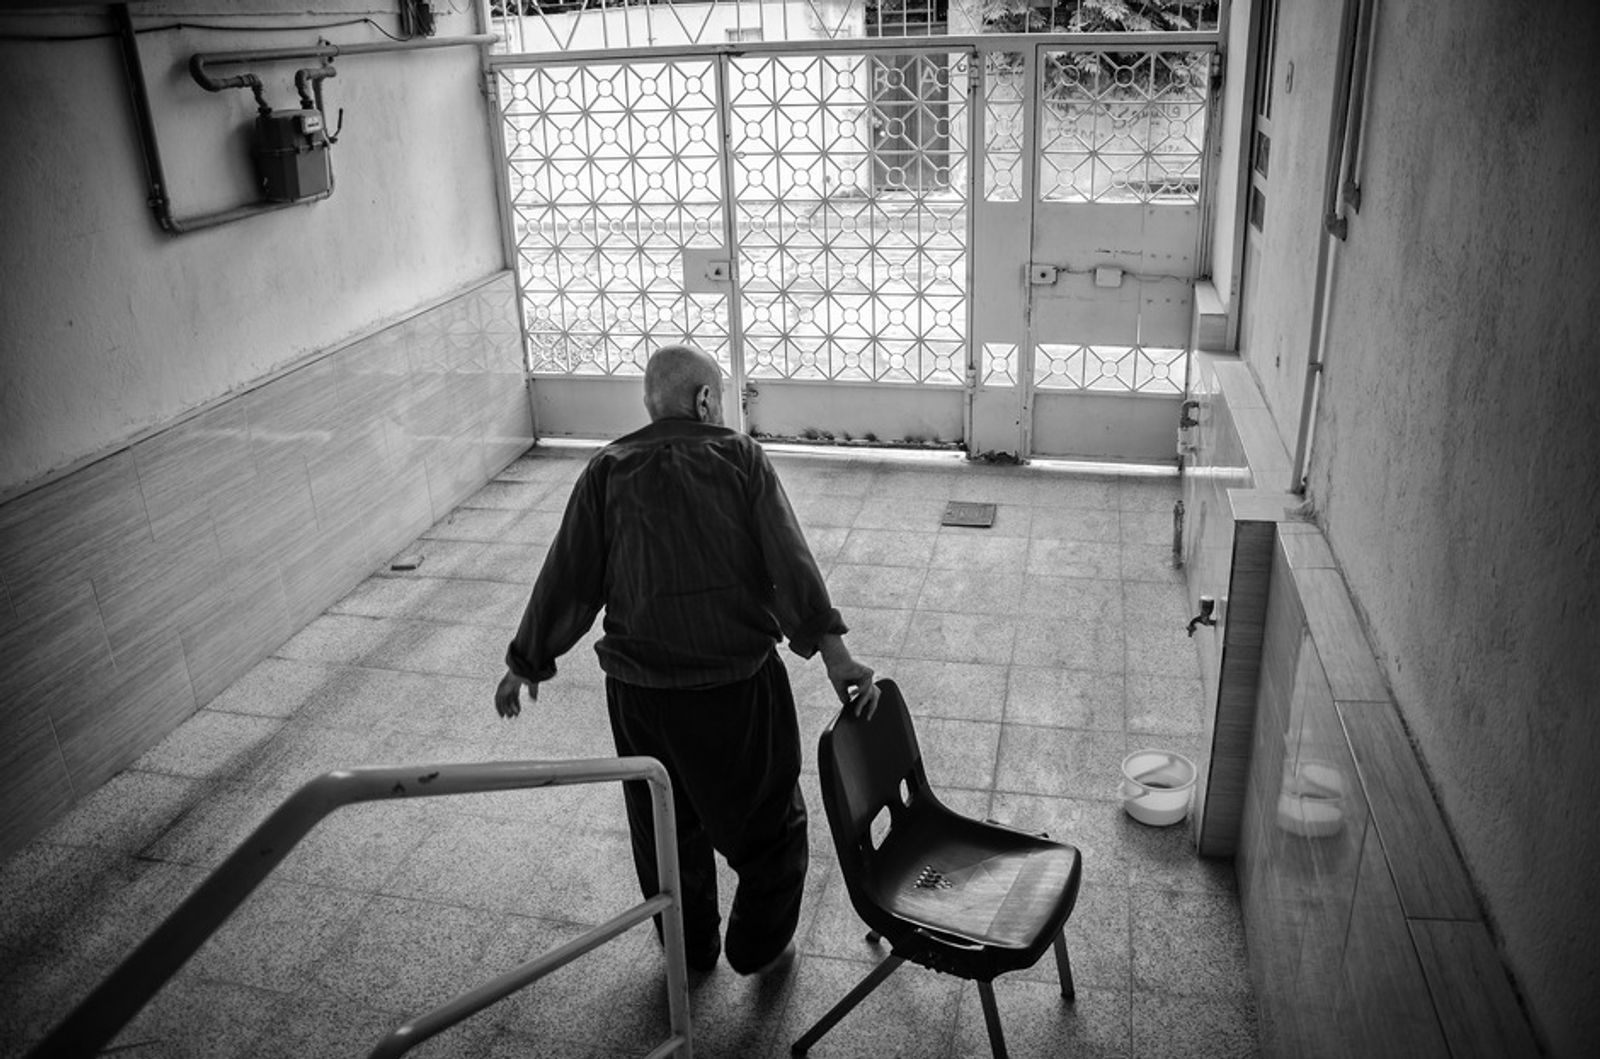 © Khashayar Sharifaee - Grandfather is dragging a chair outside of house so he can sit outside for some time and relax and breathe fresh air.